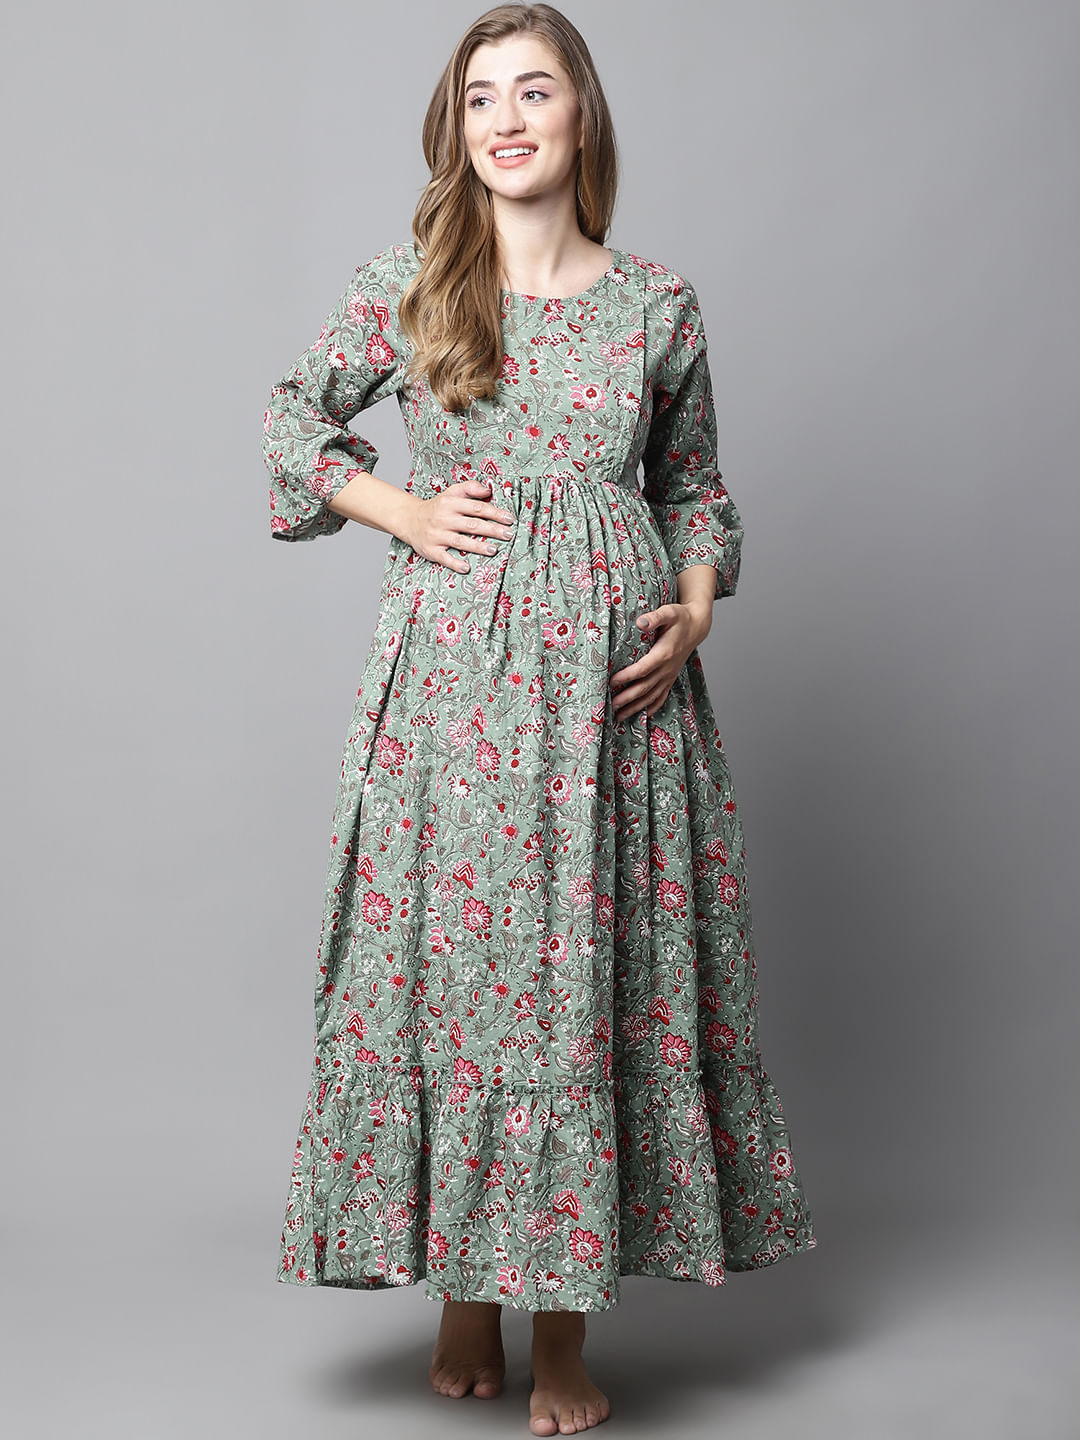 Green & Red Floral Maternity dress